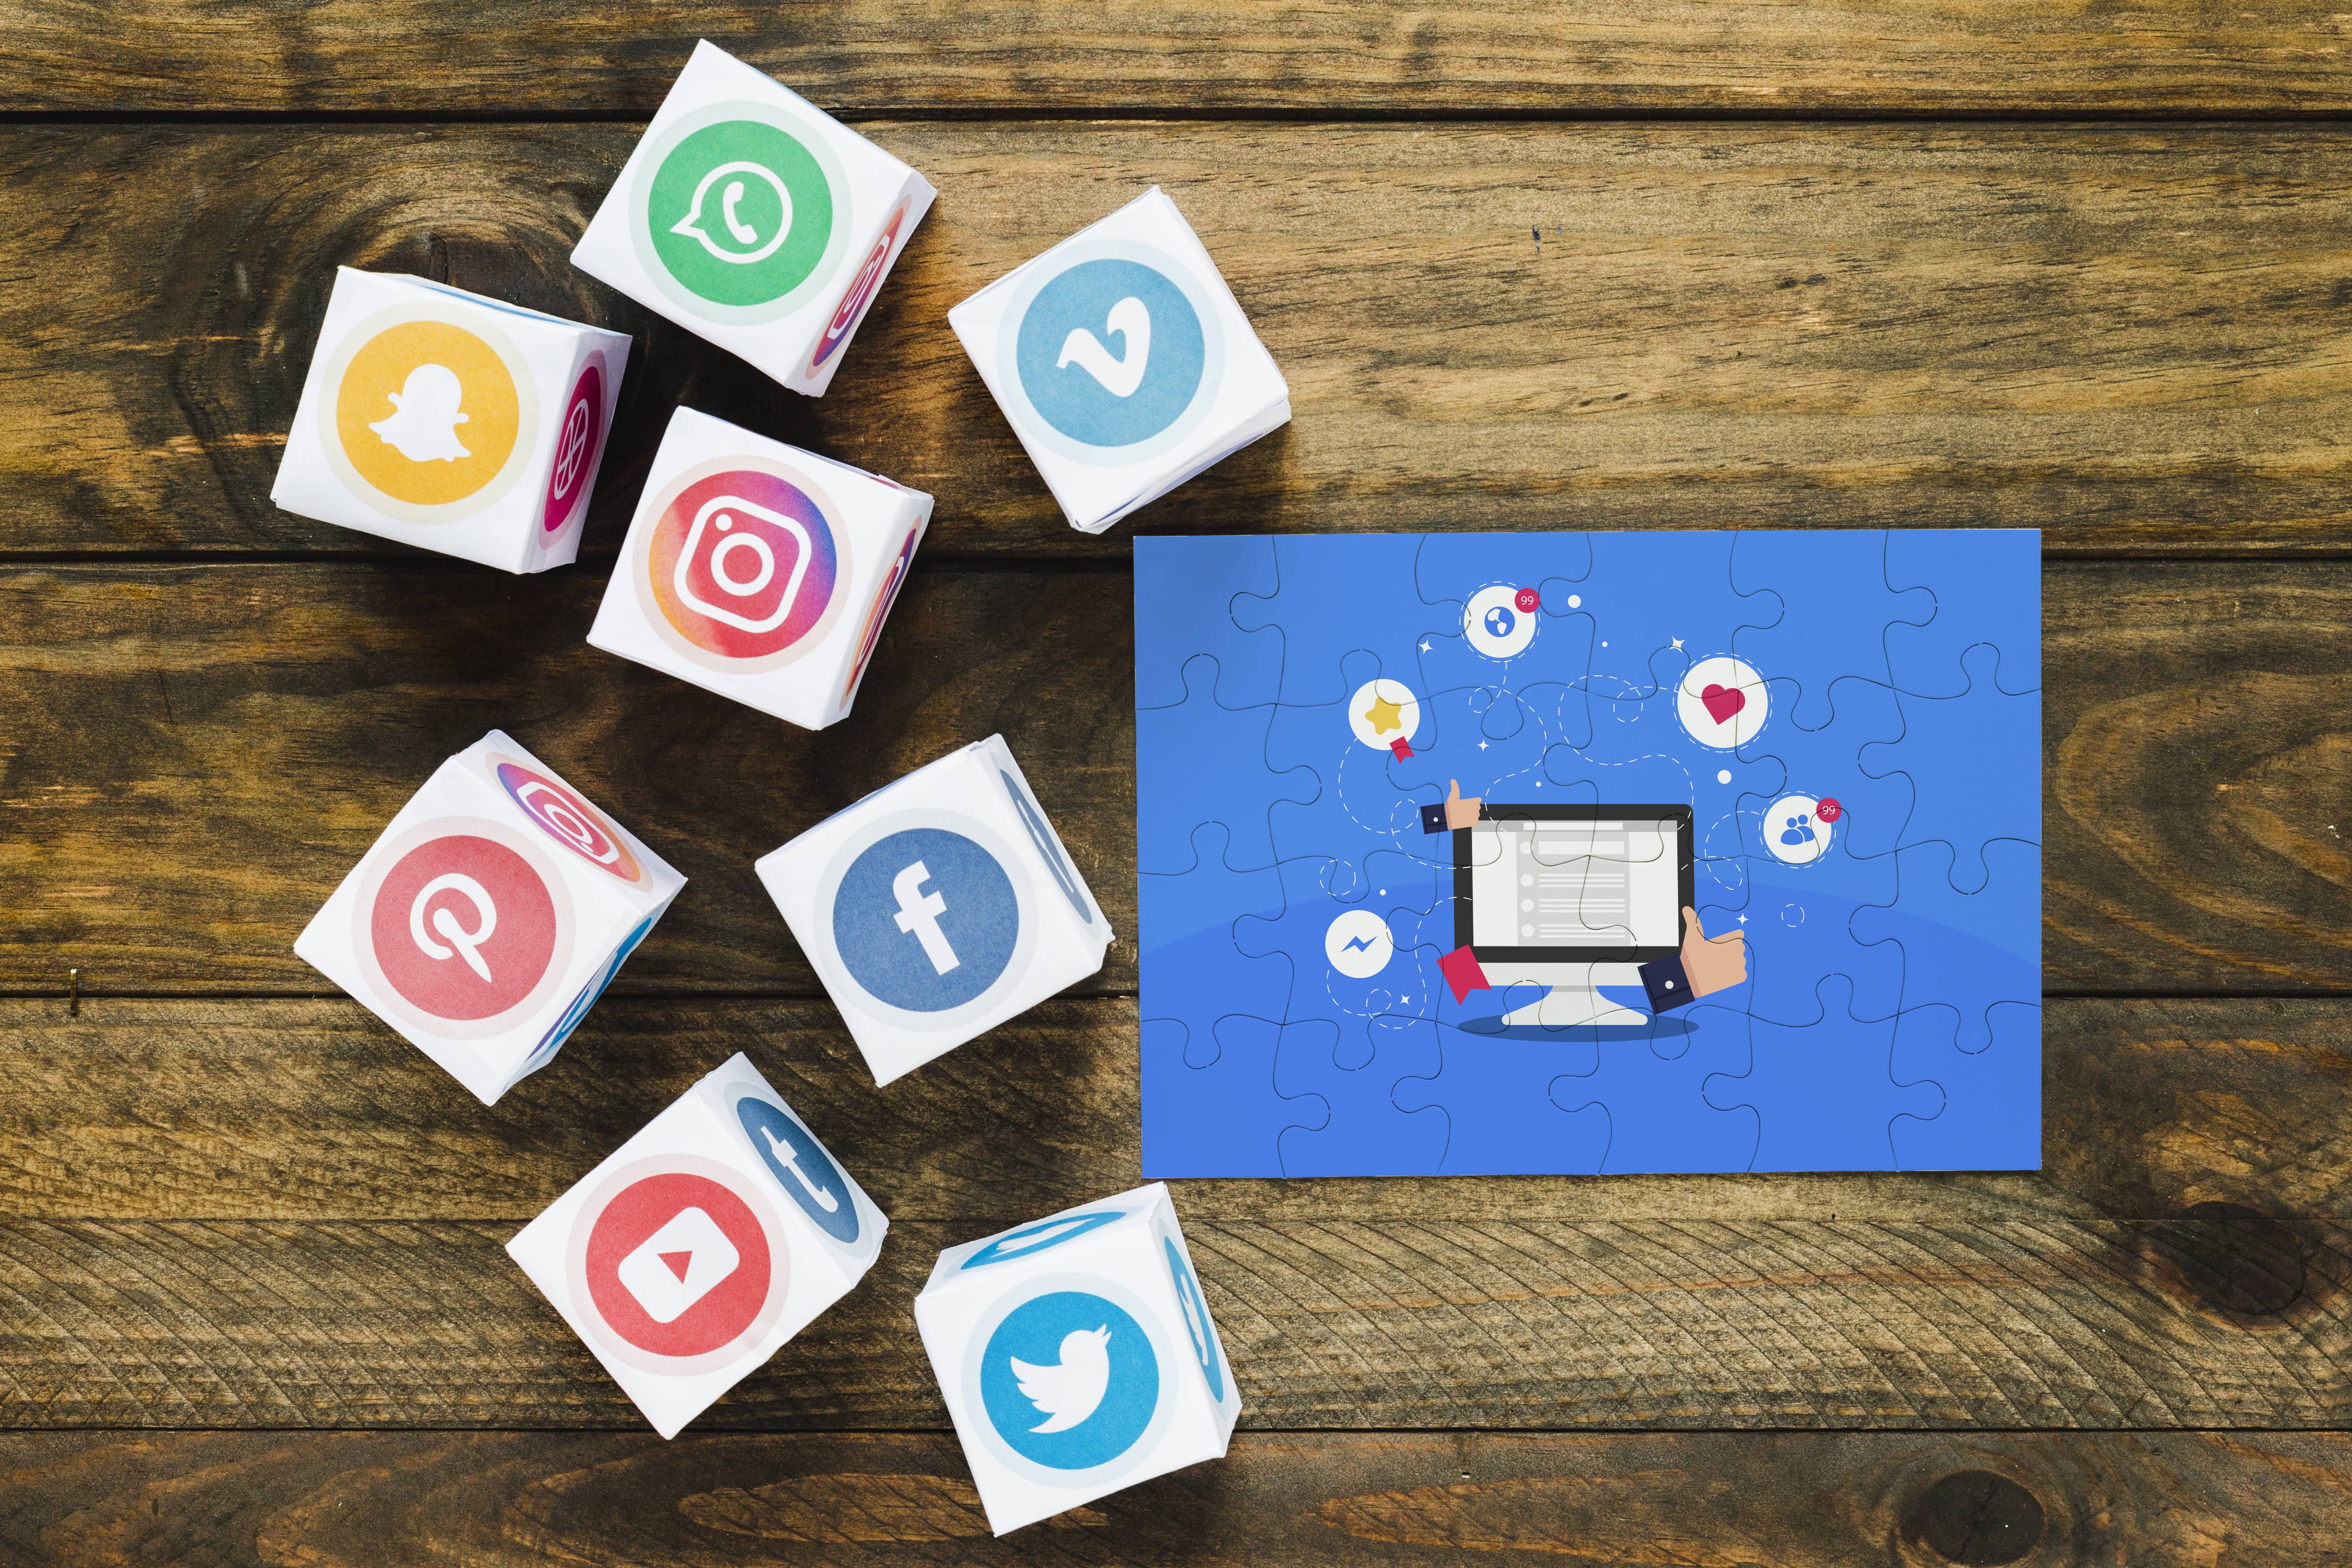 How to Create a Social Media App Everything you Need to Know